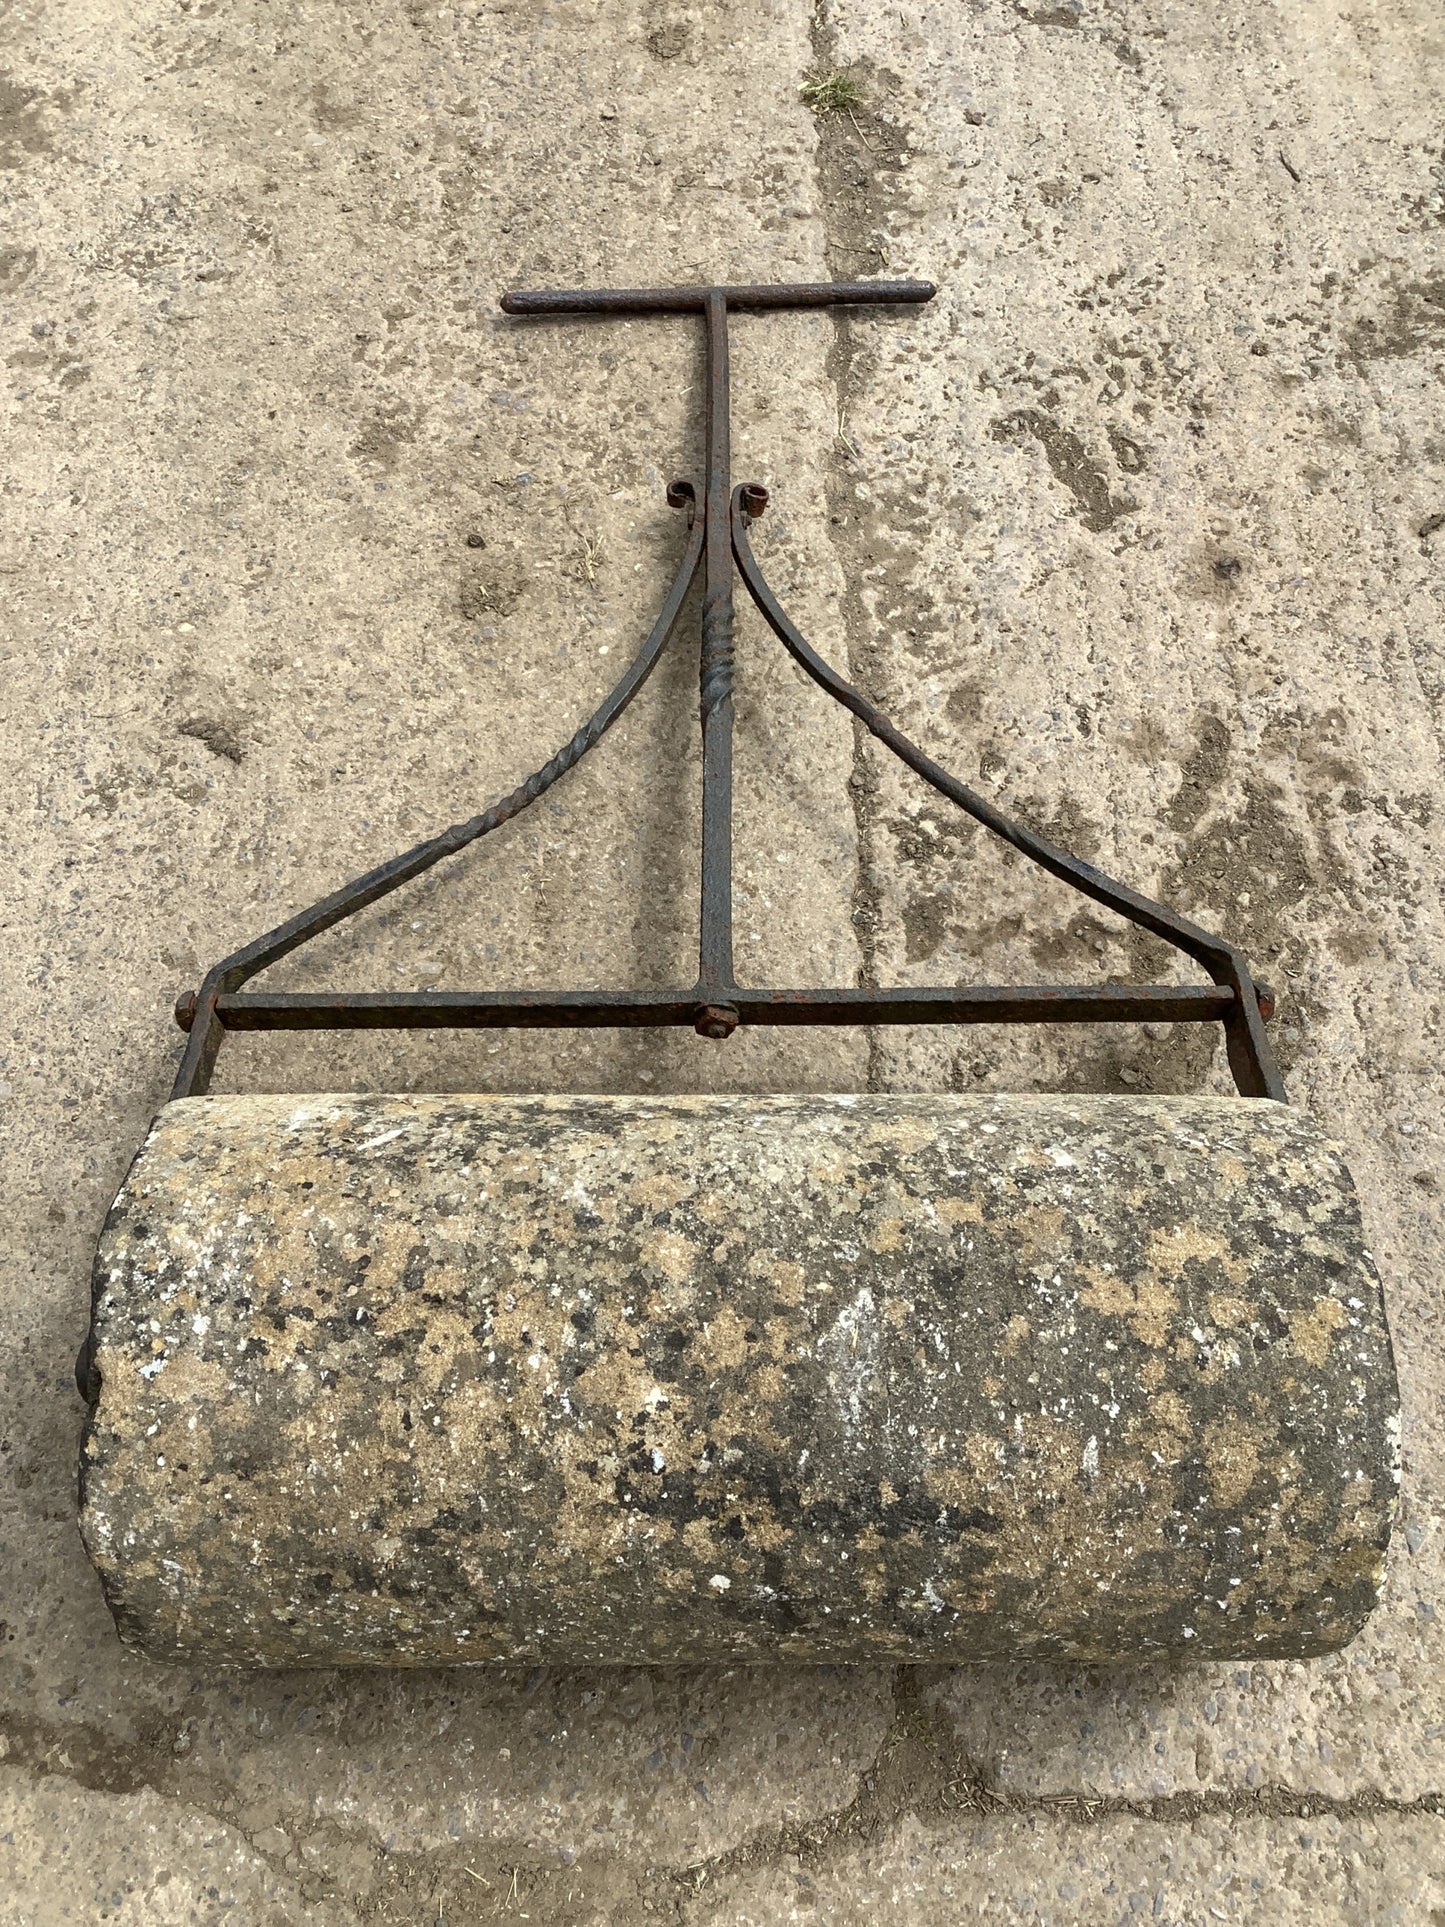 Victorian Heavy Stone Garden Lawn Roller With Wrought Iron Handle 4'3"H 2'6"x W